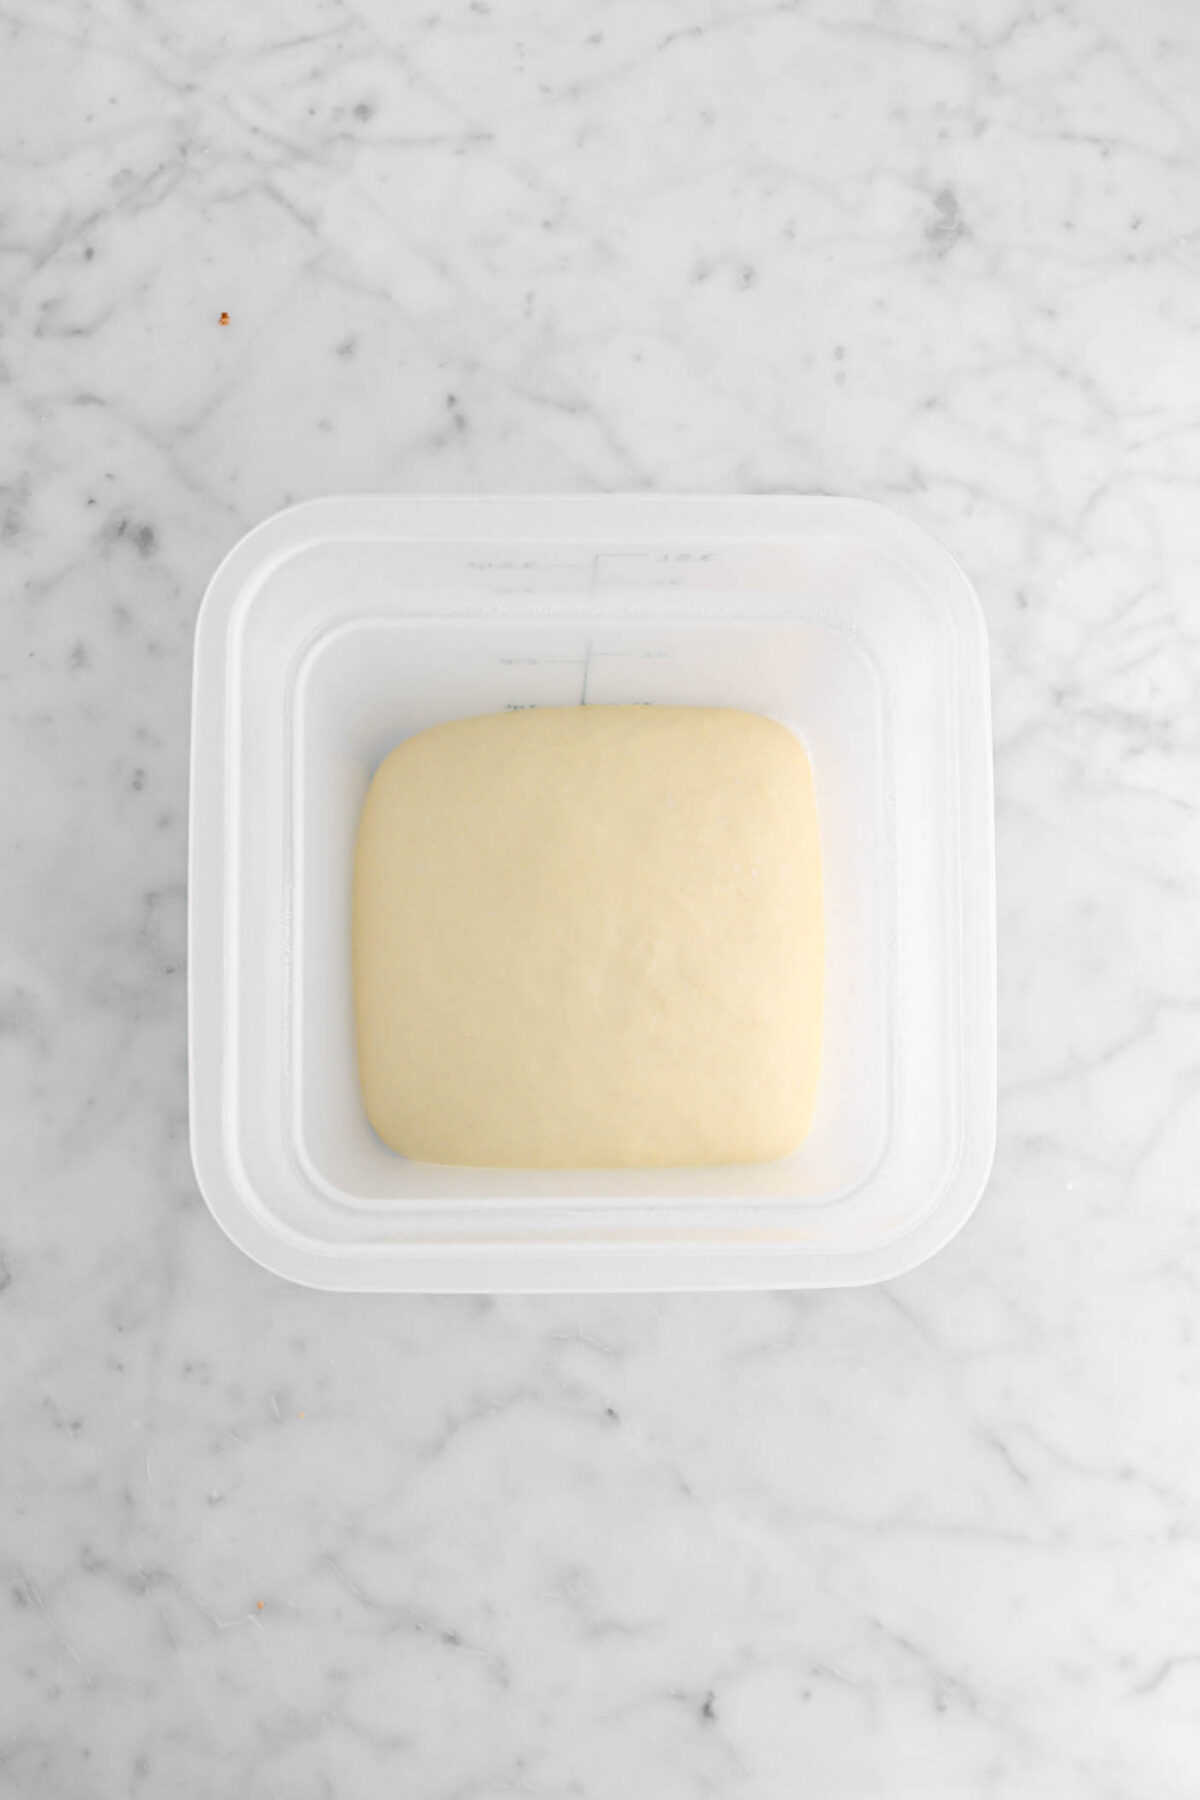 proofed dough in square plastic container.